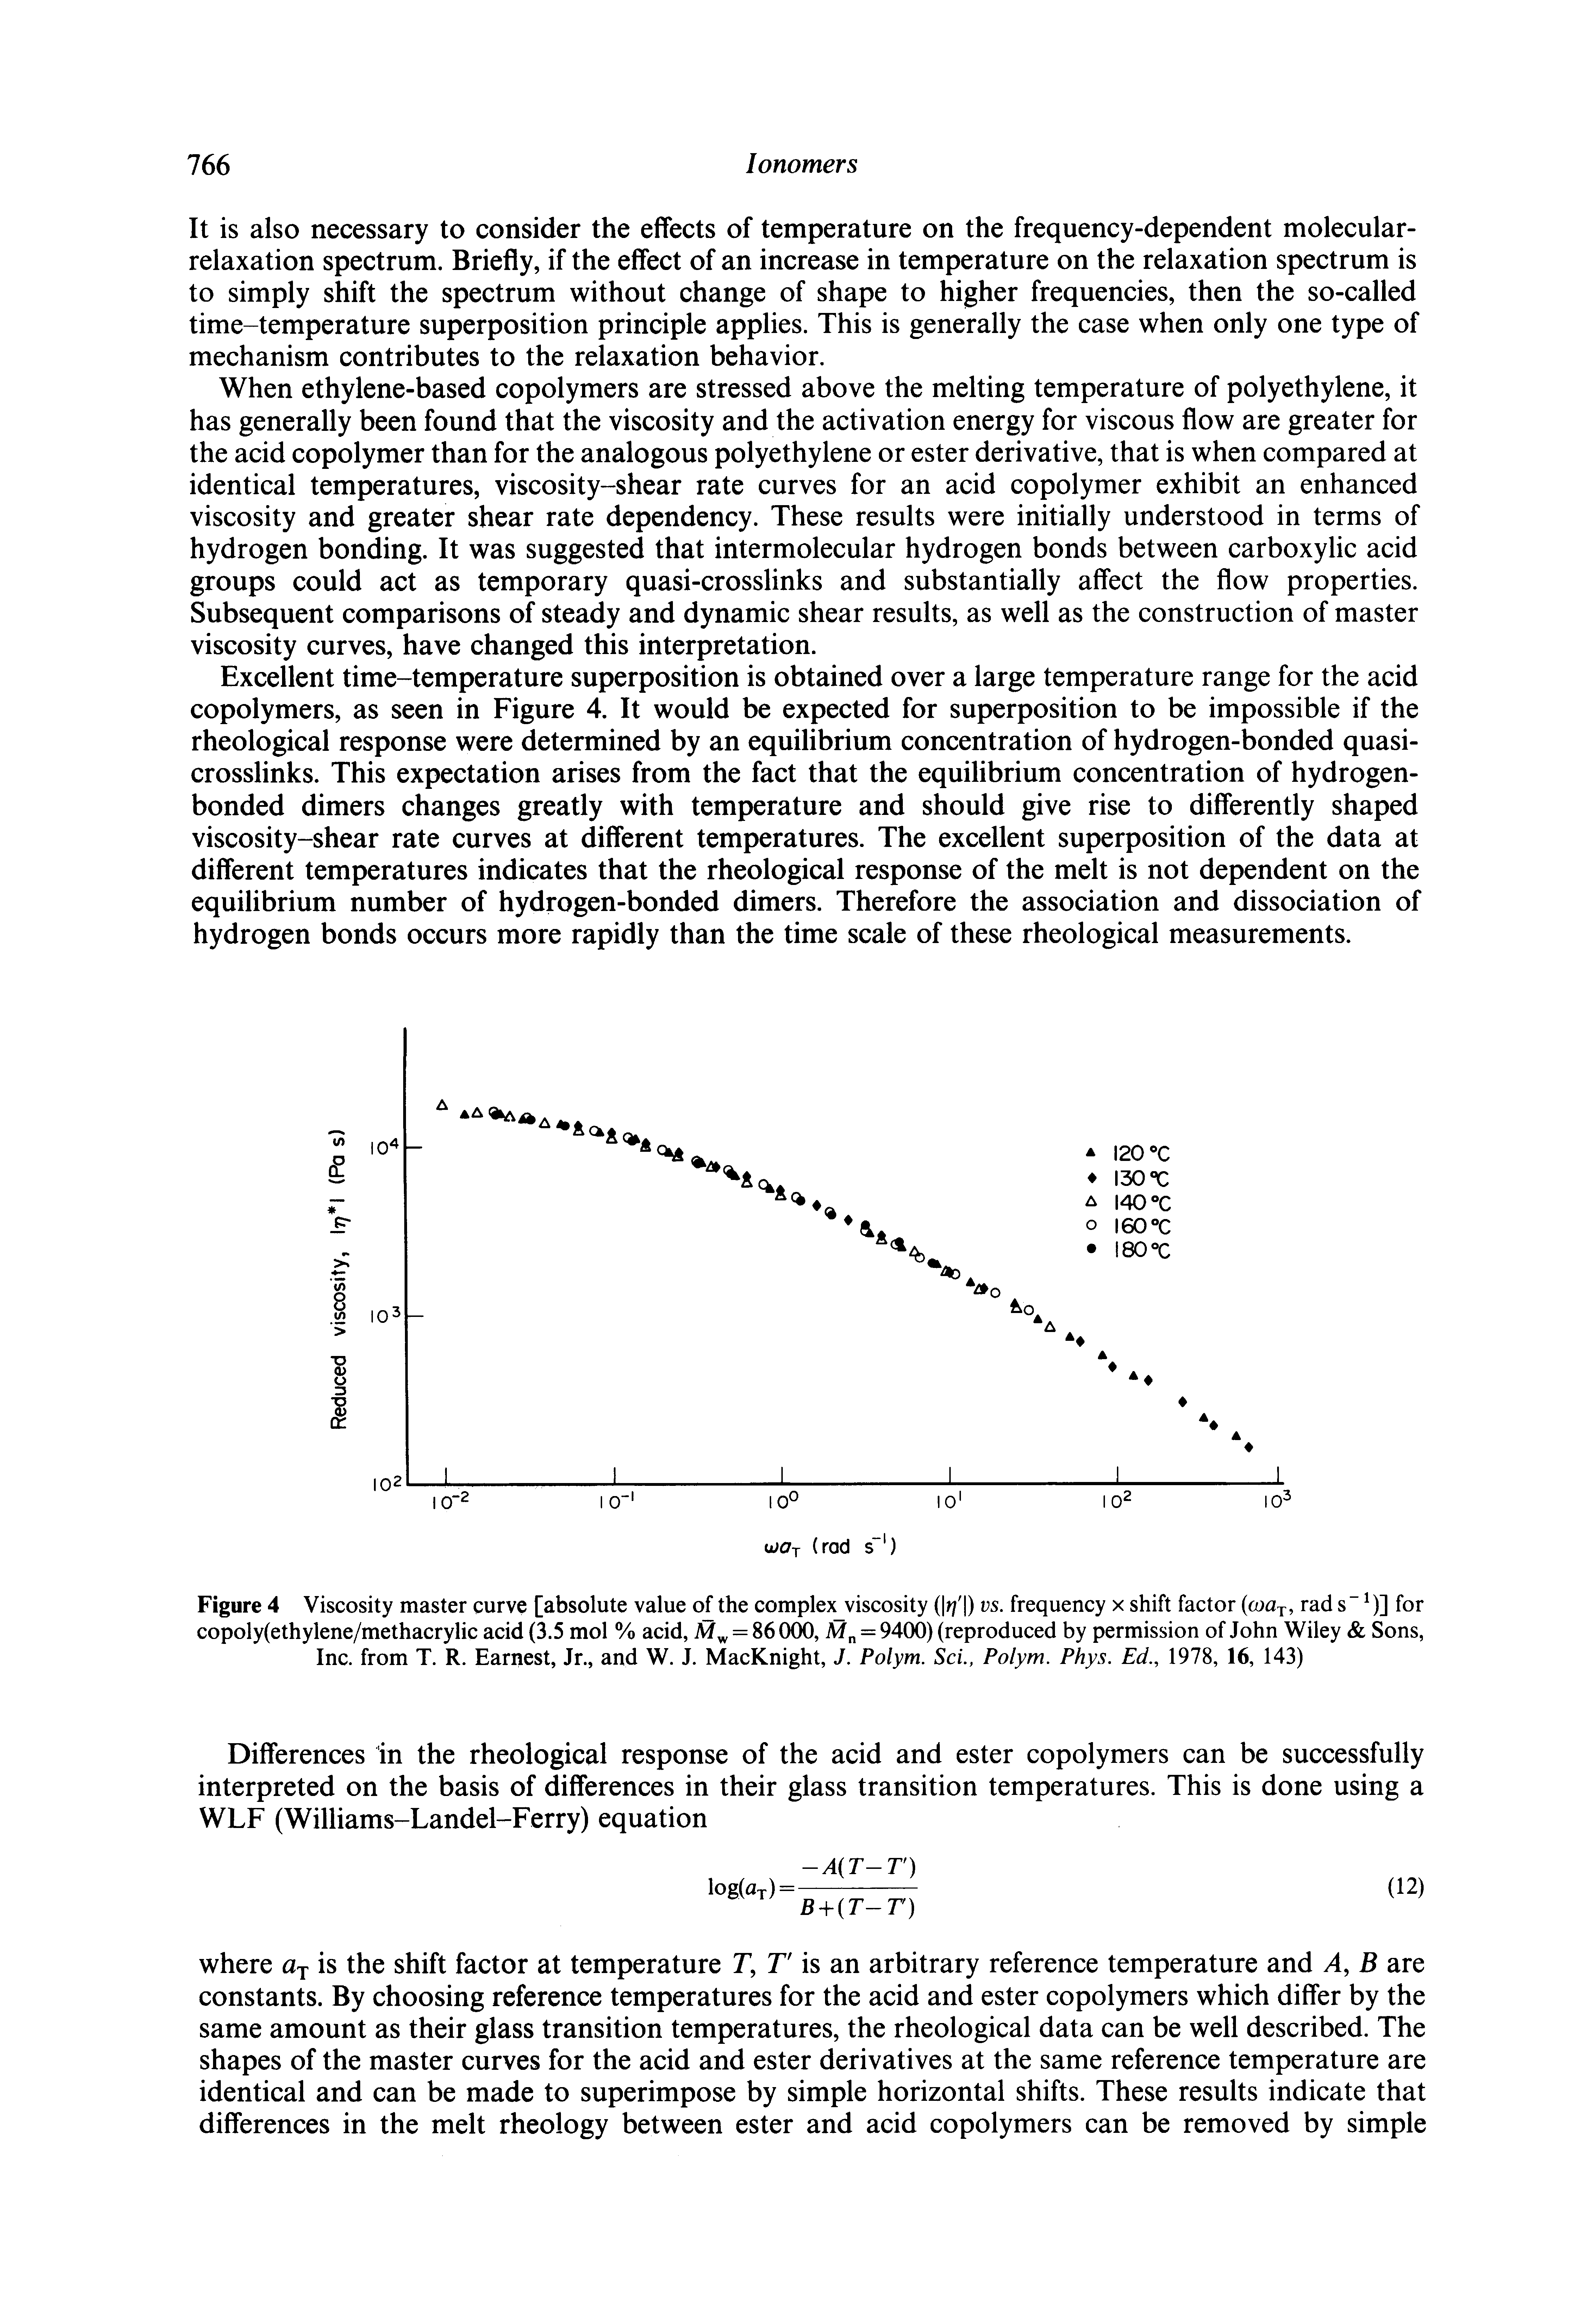 Figure 4 Viscosity master curve [absolute value of the complex viscosity ( ri ) vs. frequency x shift factor (oa, rad s" )] for copoly(ethylene/methacrylic acid (3.5 mol % acid, = 86 000, A = 9400) (reproduced by permission of John Wiley Sons, Inc. from T. R. Earnest, Jr., and W. J. MacKnight, J. Polym. ScL, Polym. Phys. Ed., 1978, 16, 143)...